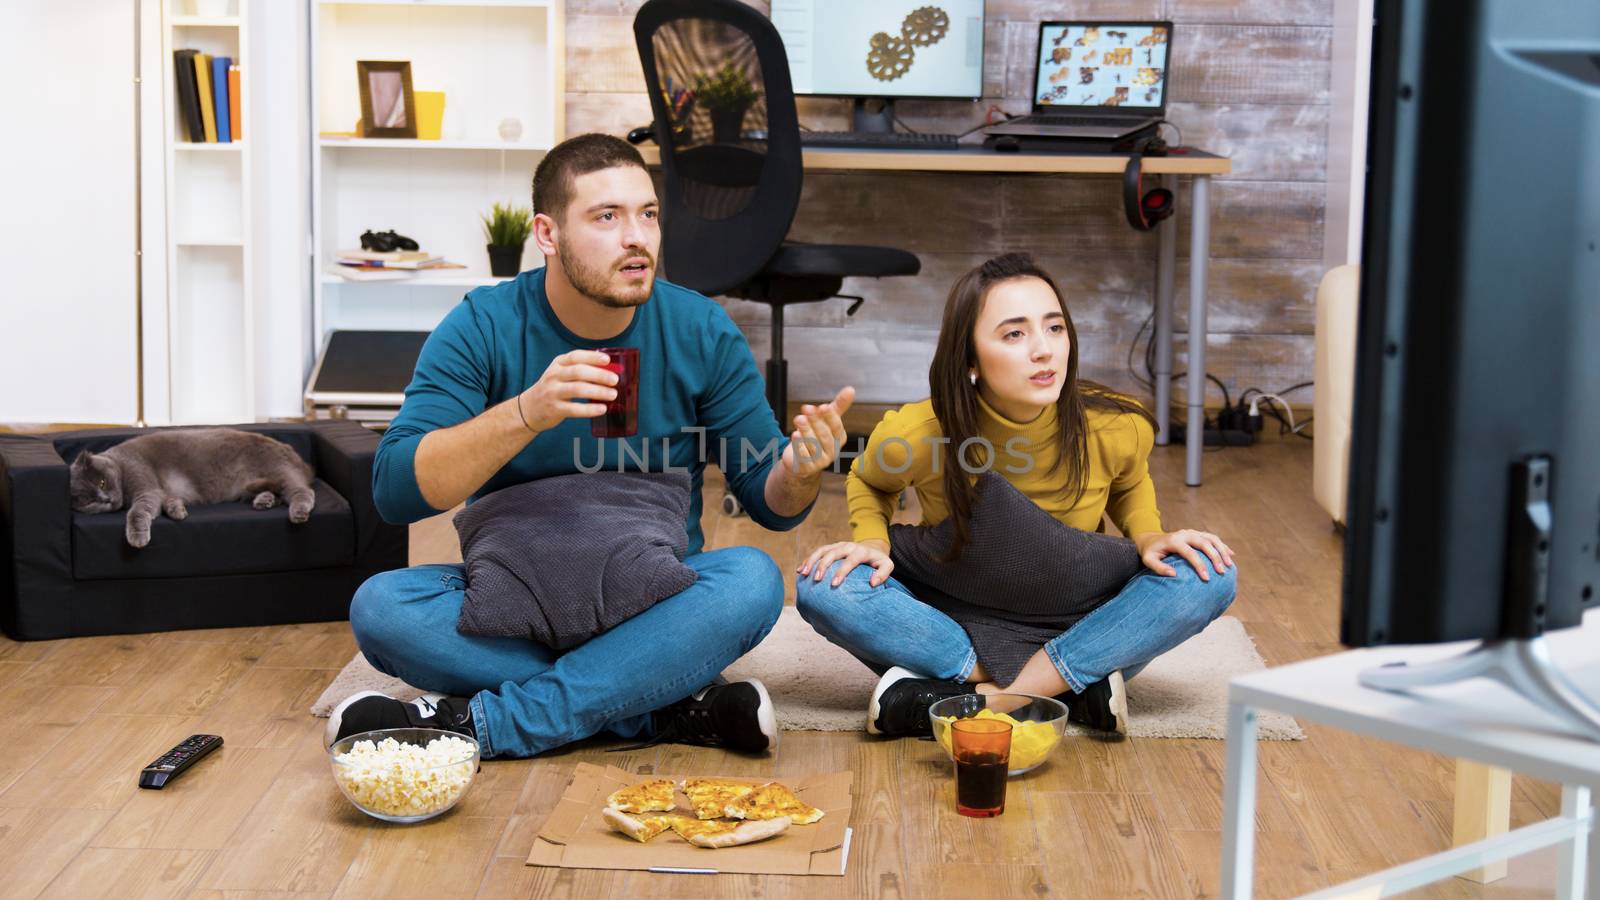 Young couple sitting on the floor cheering up, eating junk food while watching sport championship on tv and cat sleeping.